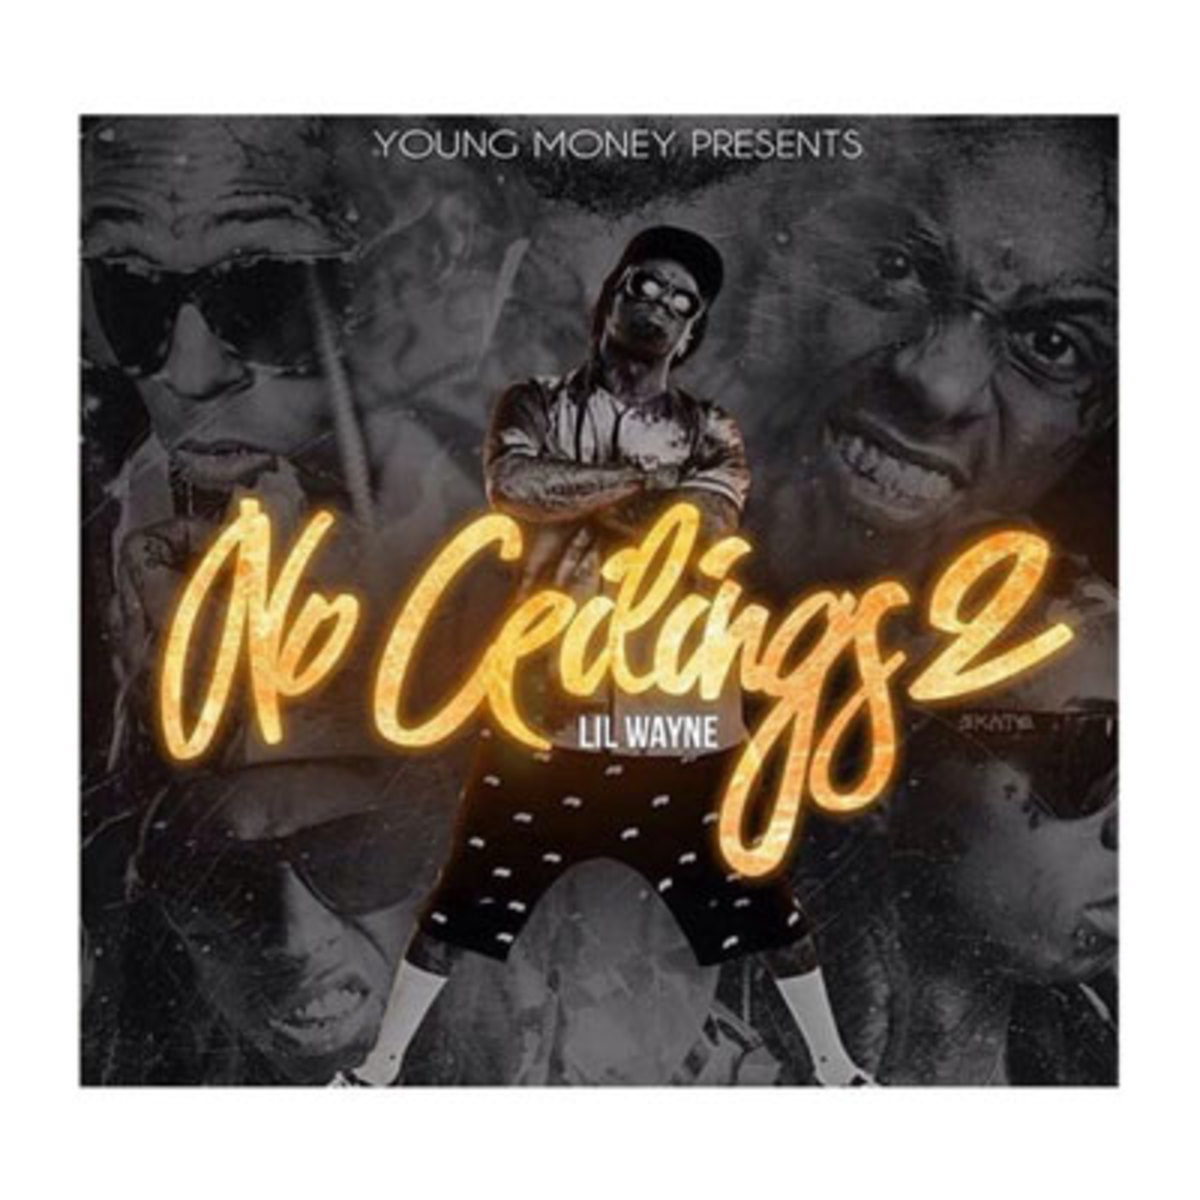 The Best Worst Lyrics From Lil Wayne S No Ceilings 2